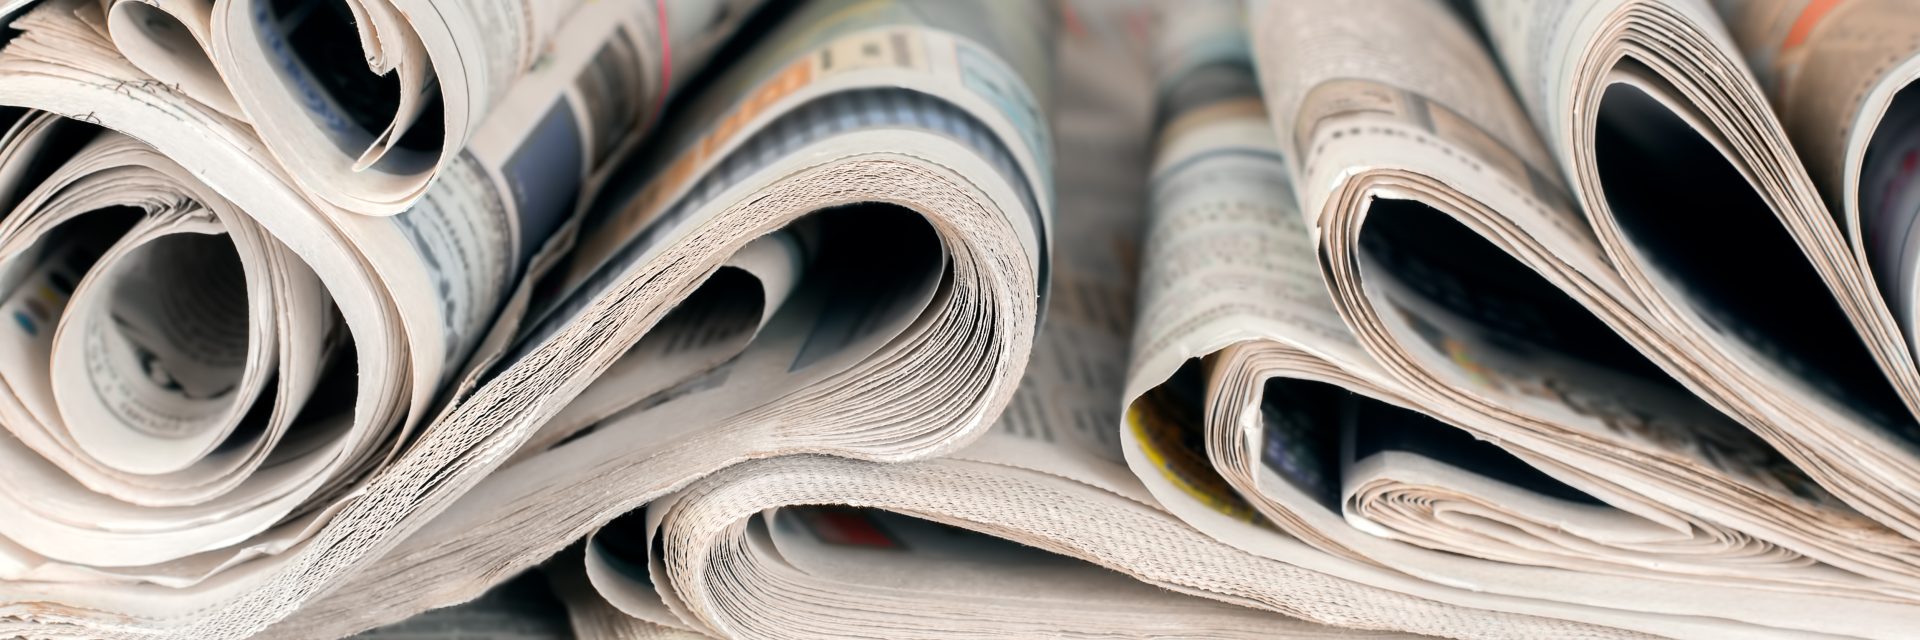 Editorial: Misinformation growth makes free, independent news media more crucial than ever before